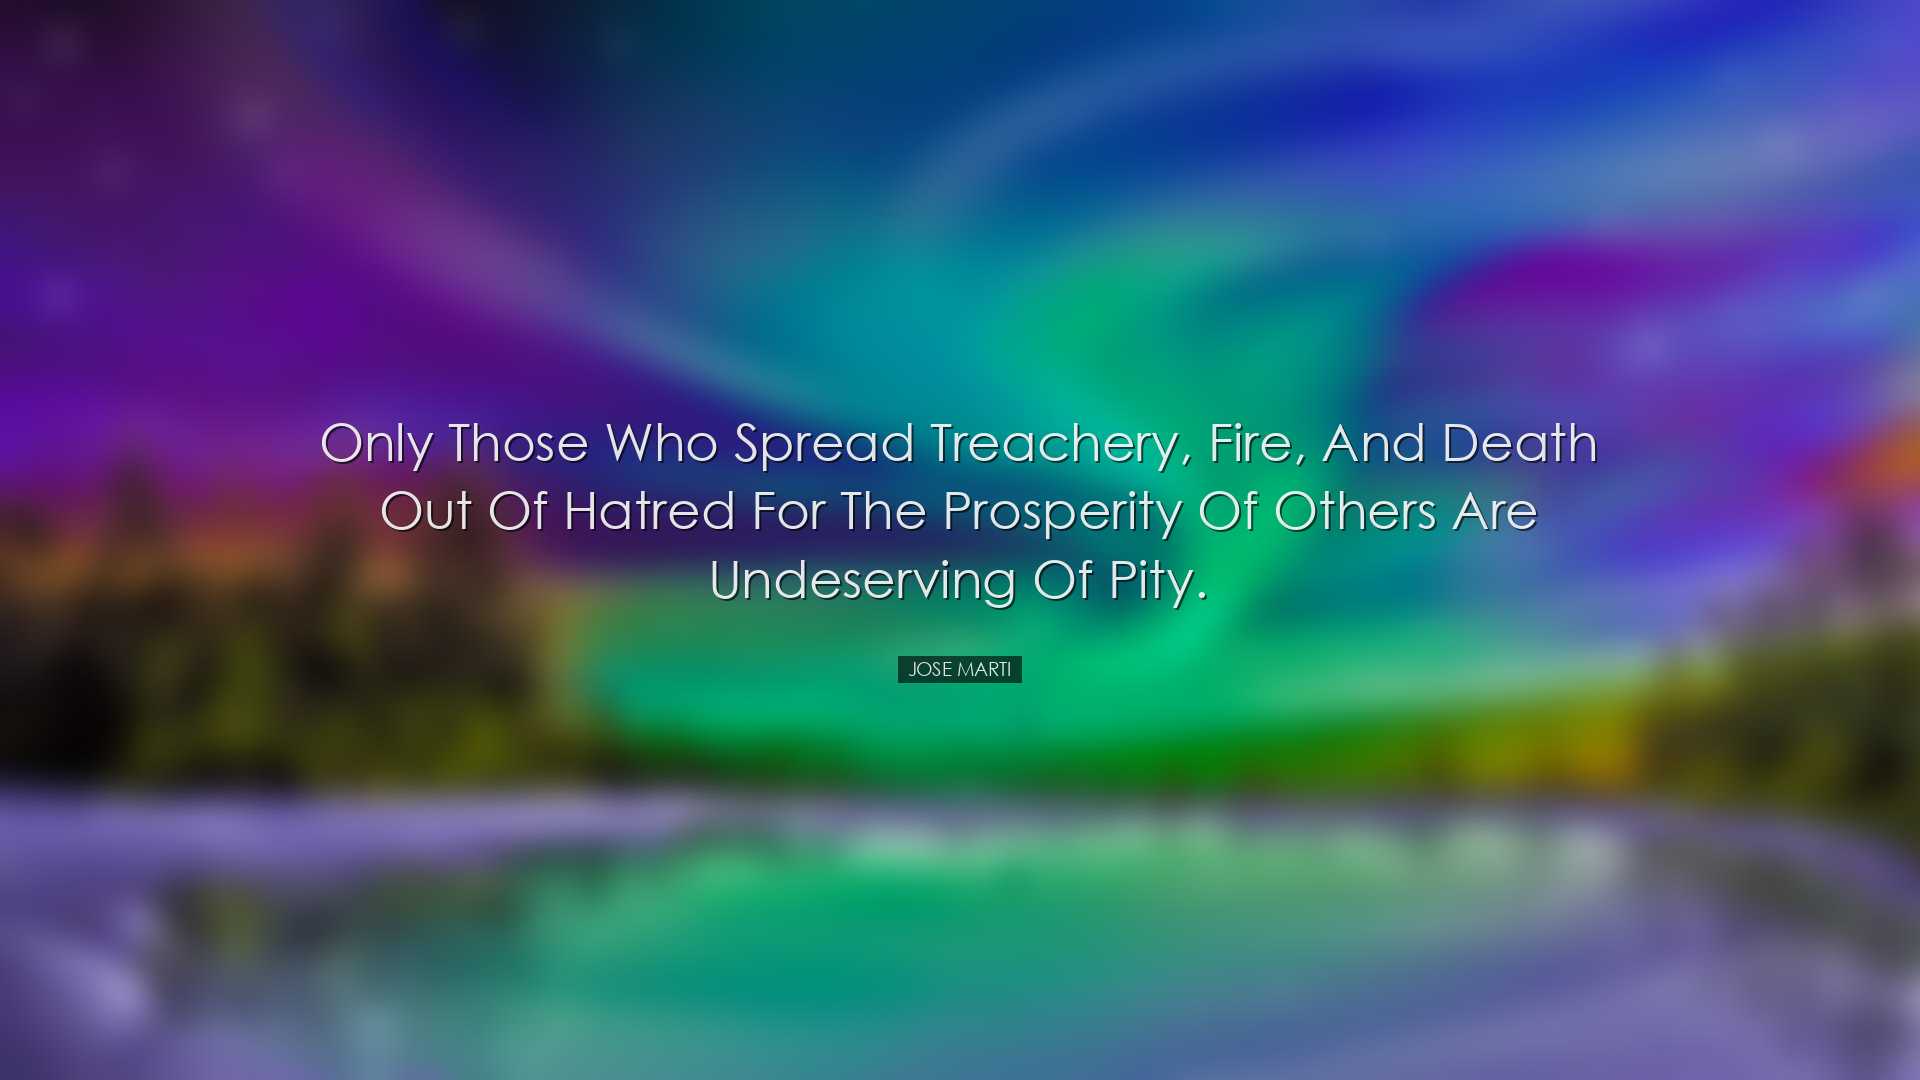 Only those who spread treachery, fire, and death out of hatred for